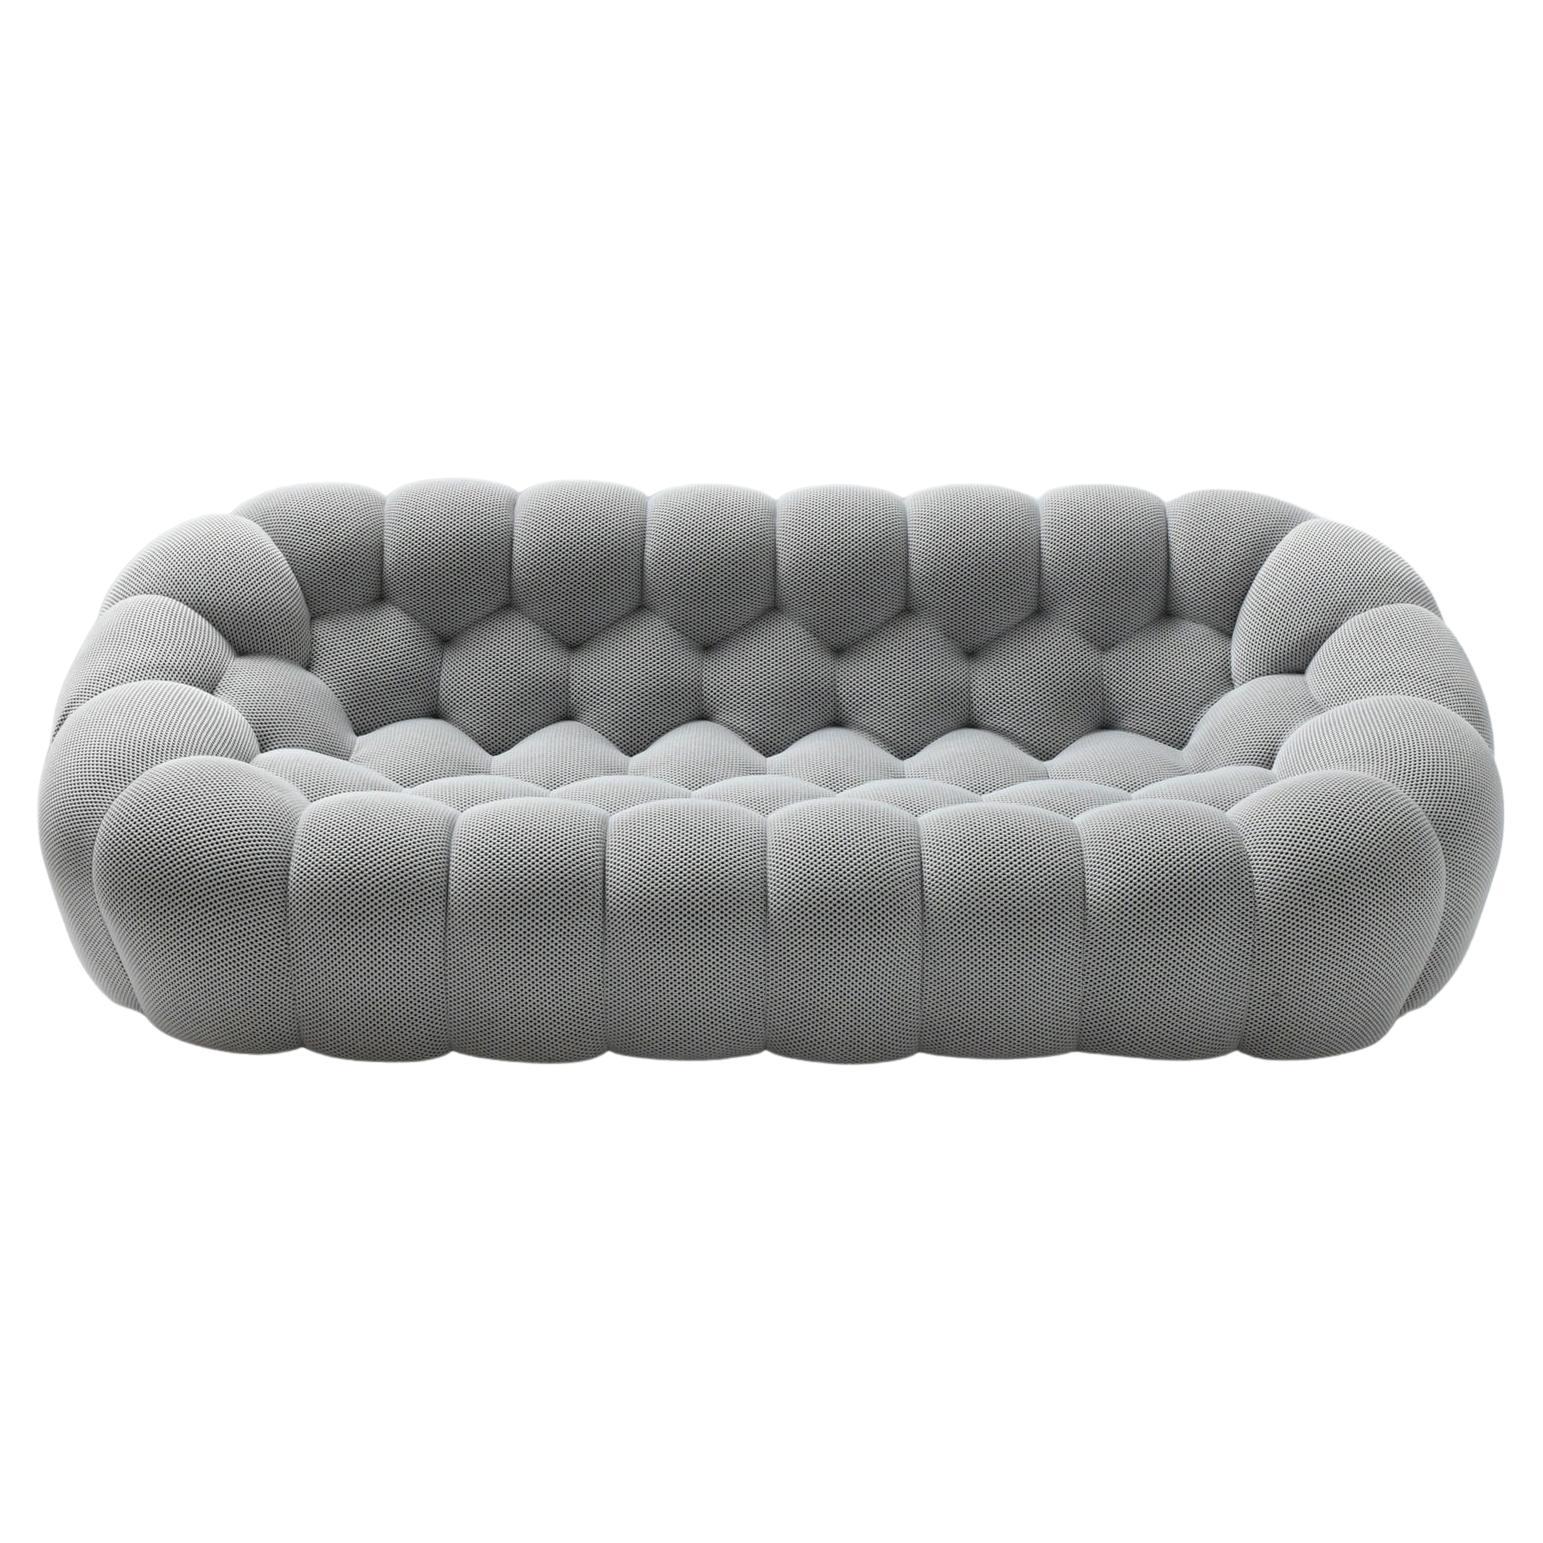 Superb Bubble sofa in gray fabric by Sasha Lakic for Roche Bobois France -  Occasion | auctionlab